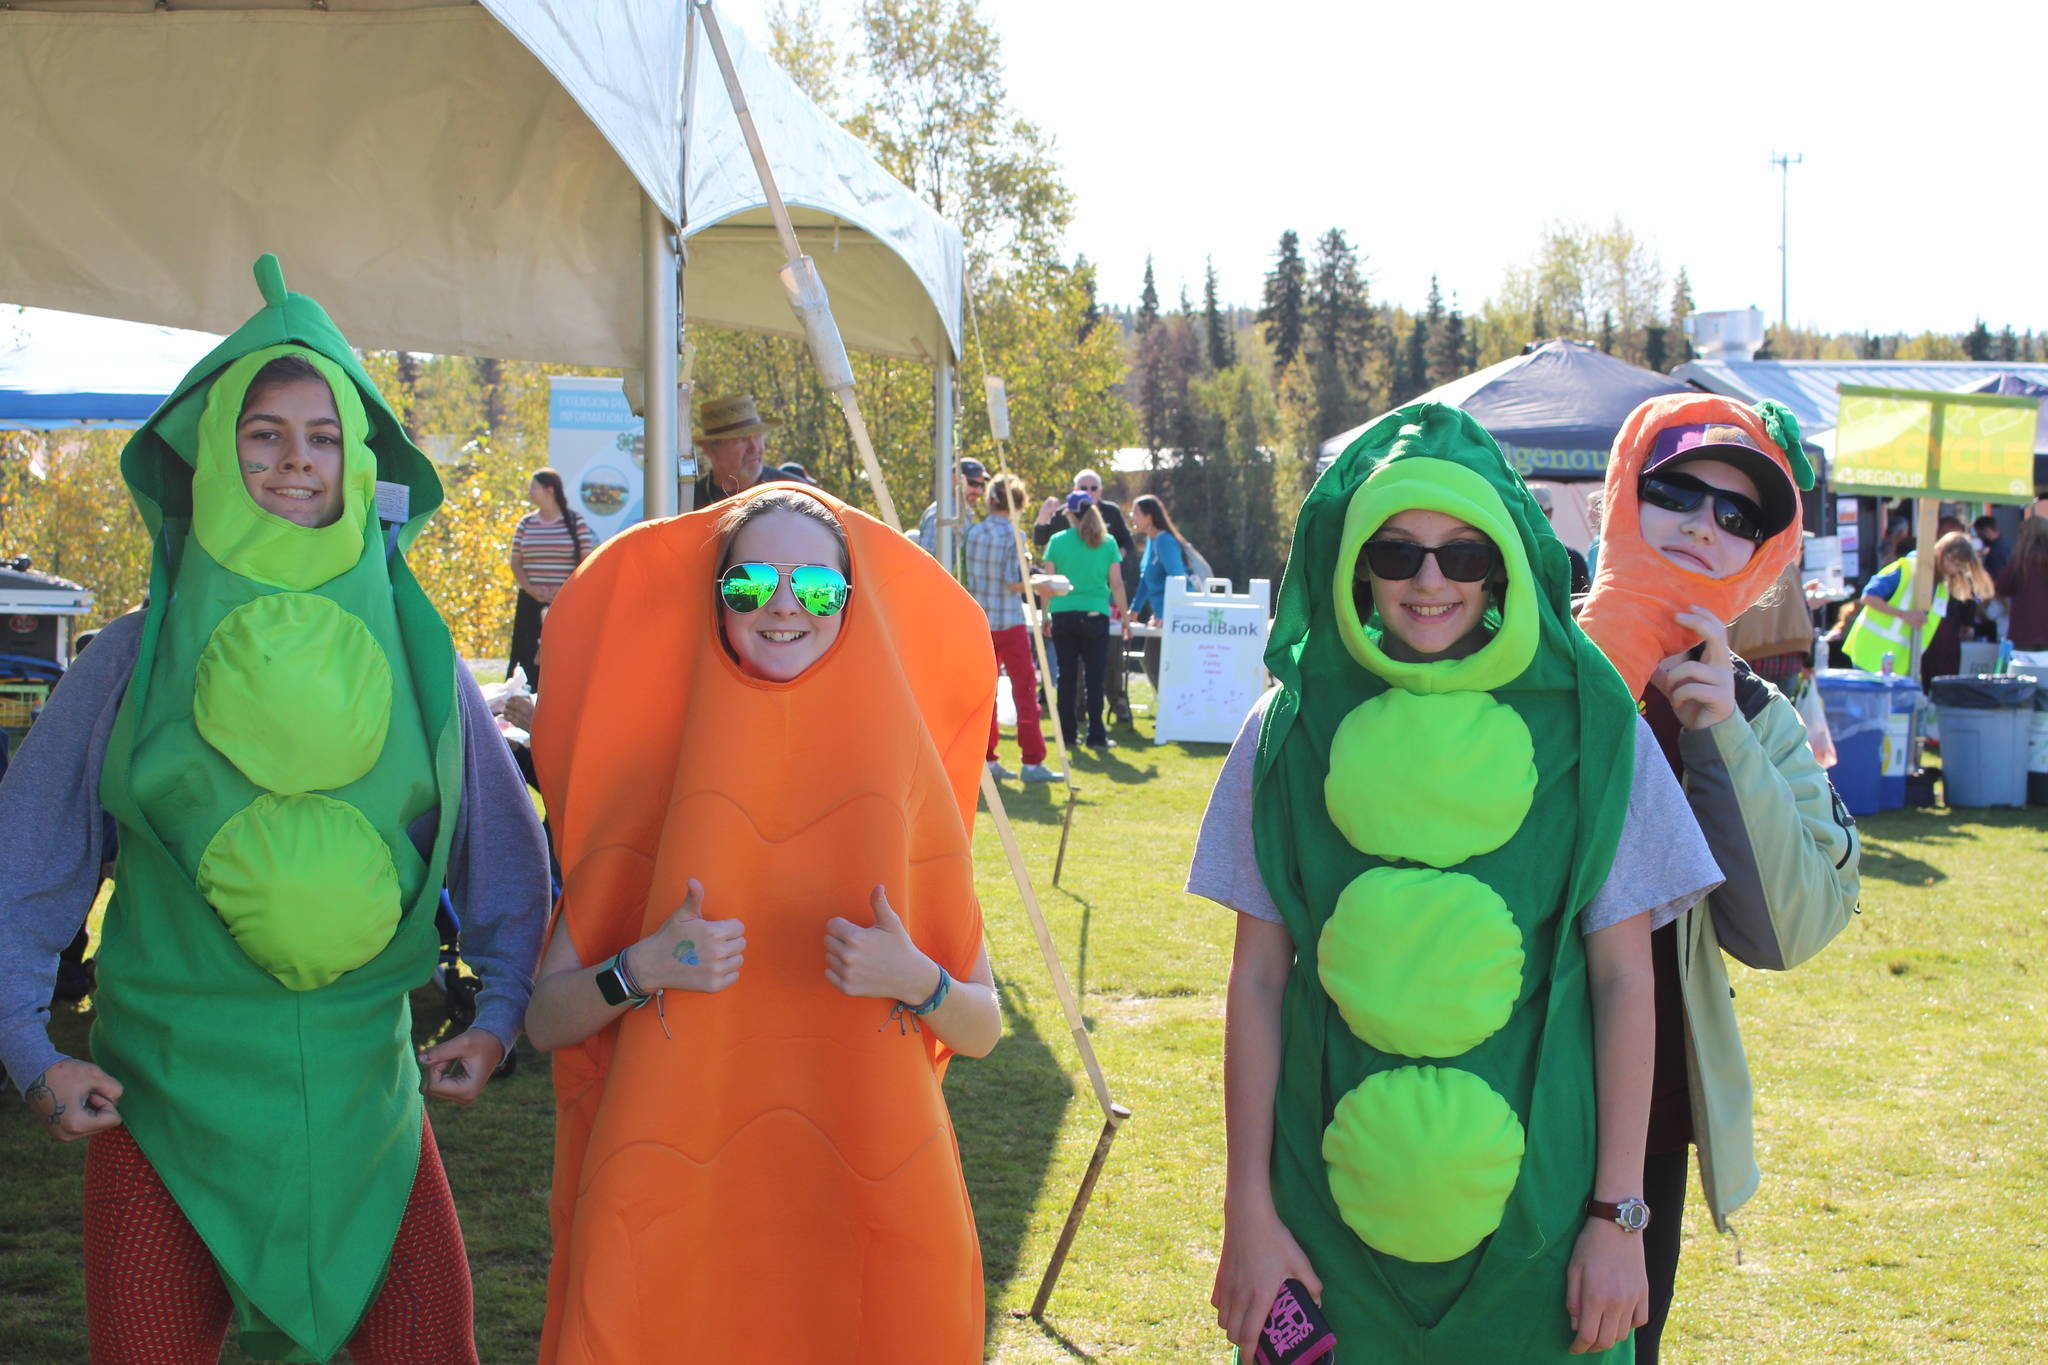 From left, Isabel McClure, Ava Fabian, Brooke Summers and Emma Bolling smile for the camera while volunteering at the Harvest Moon Local Food Festival at Soldotna Creek Park on Sept. 14, 2019. (Photo by Brian Mazurek/Peninsula Clarion)